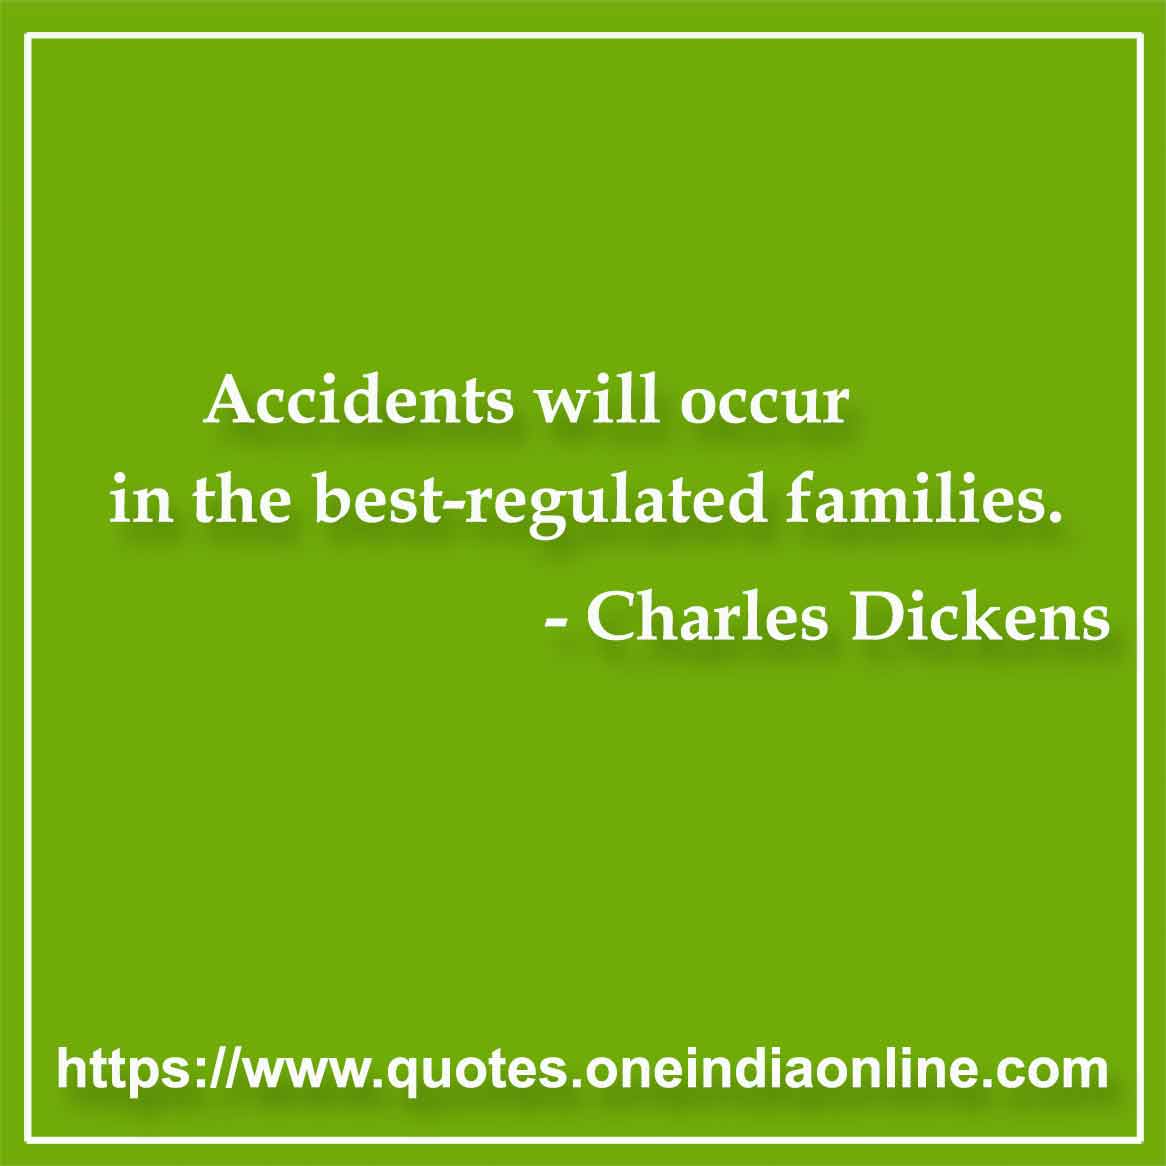 Accidents will occur in the best-regulated families. 

- Charles Dickens 